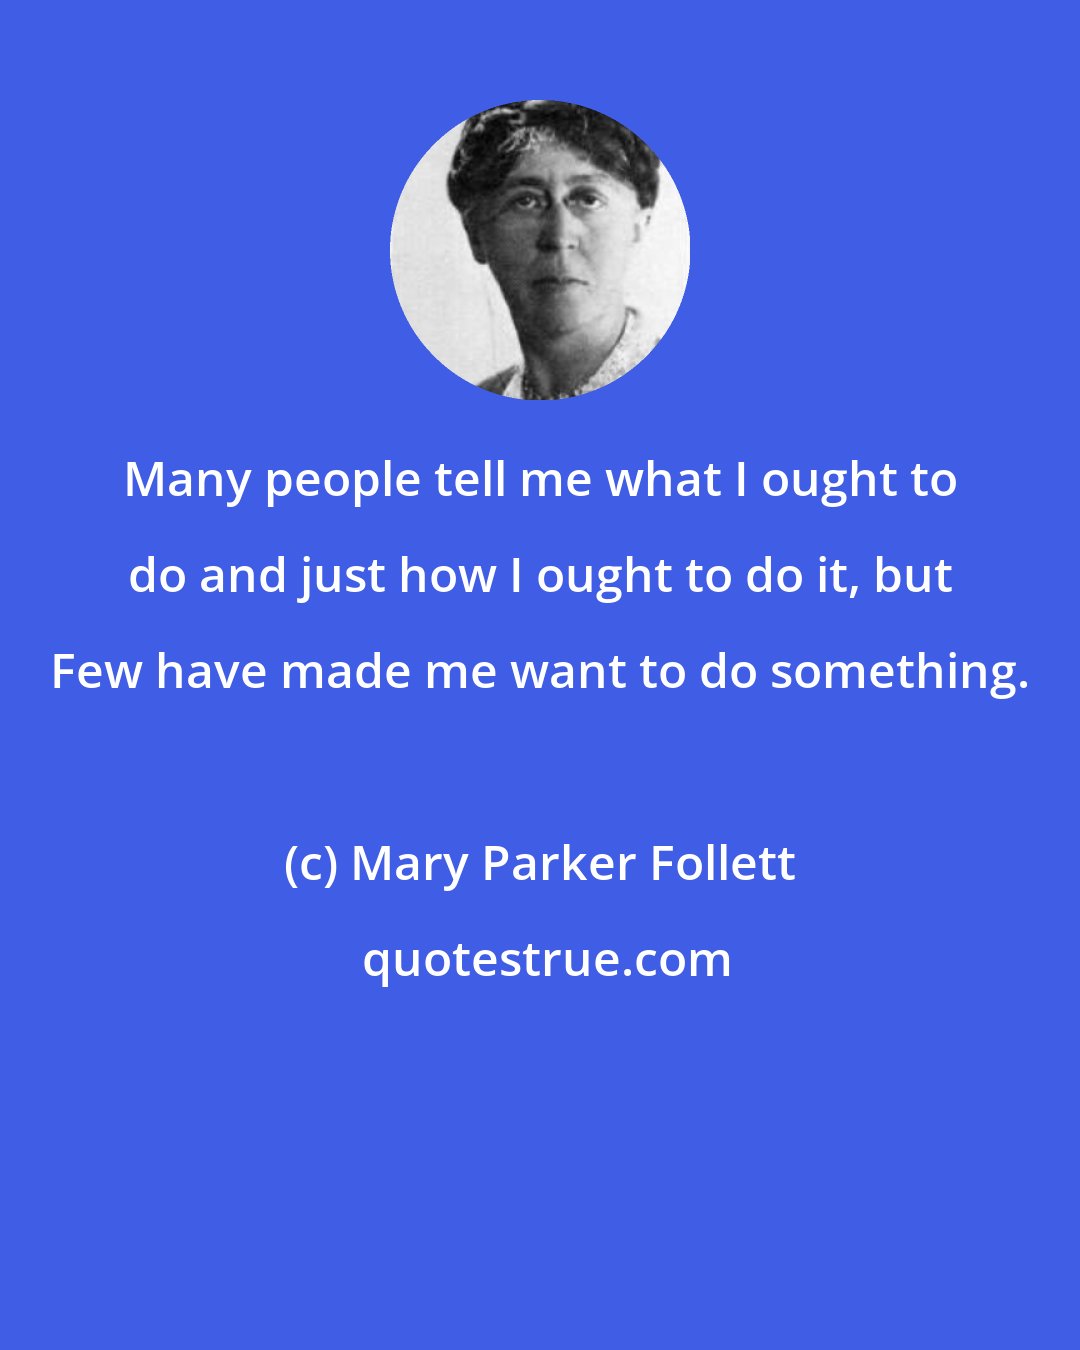 Mary Parker Follett: Many people tell me what I ought to do and just how I ought to do it, but Few have made me want to do something.